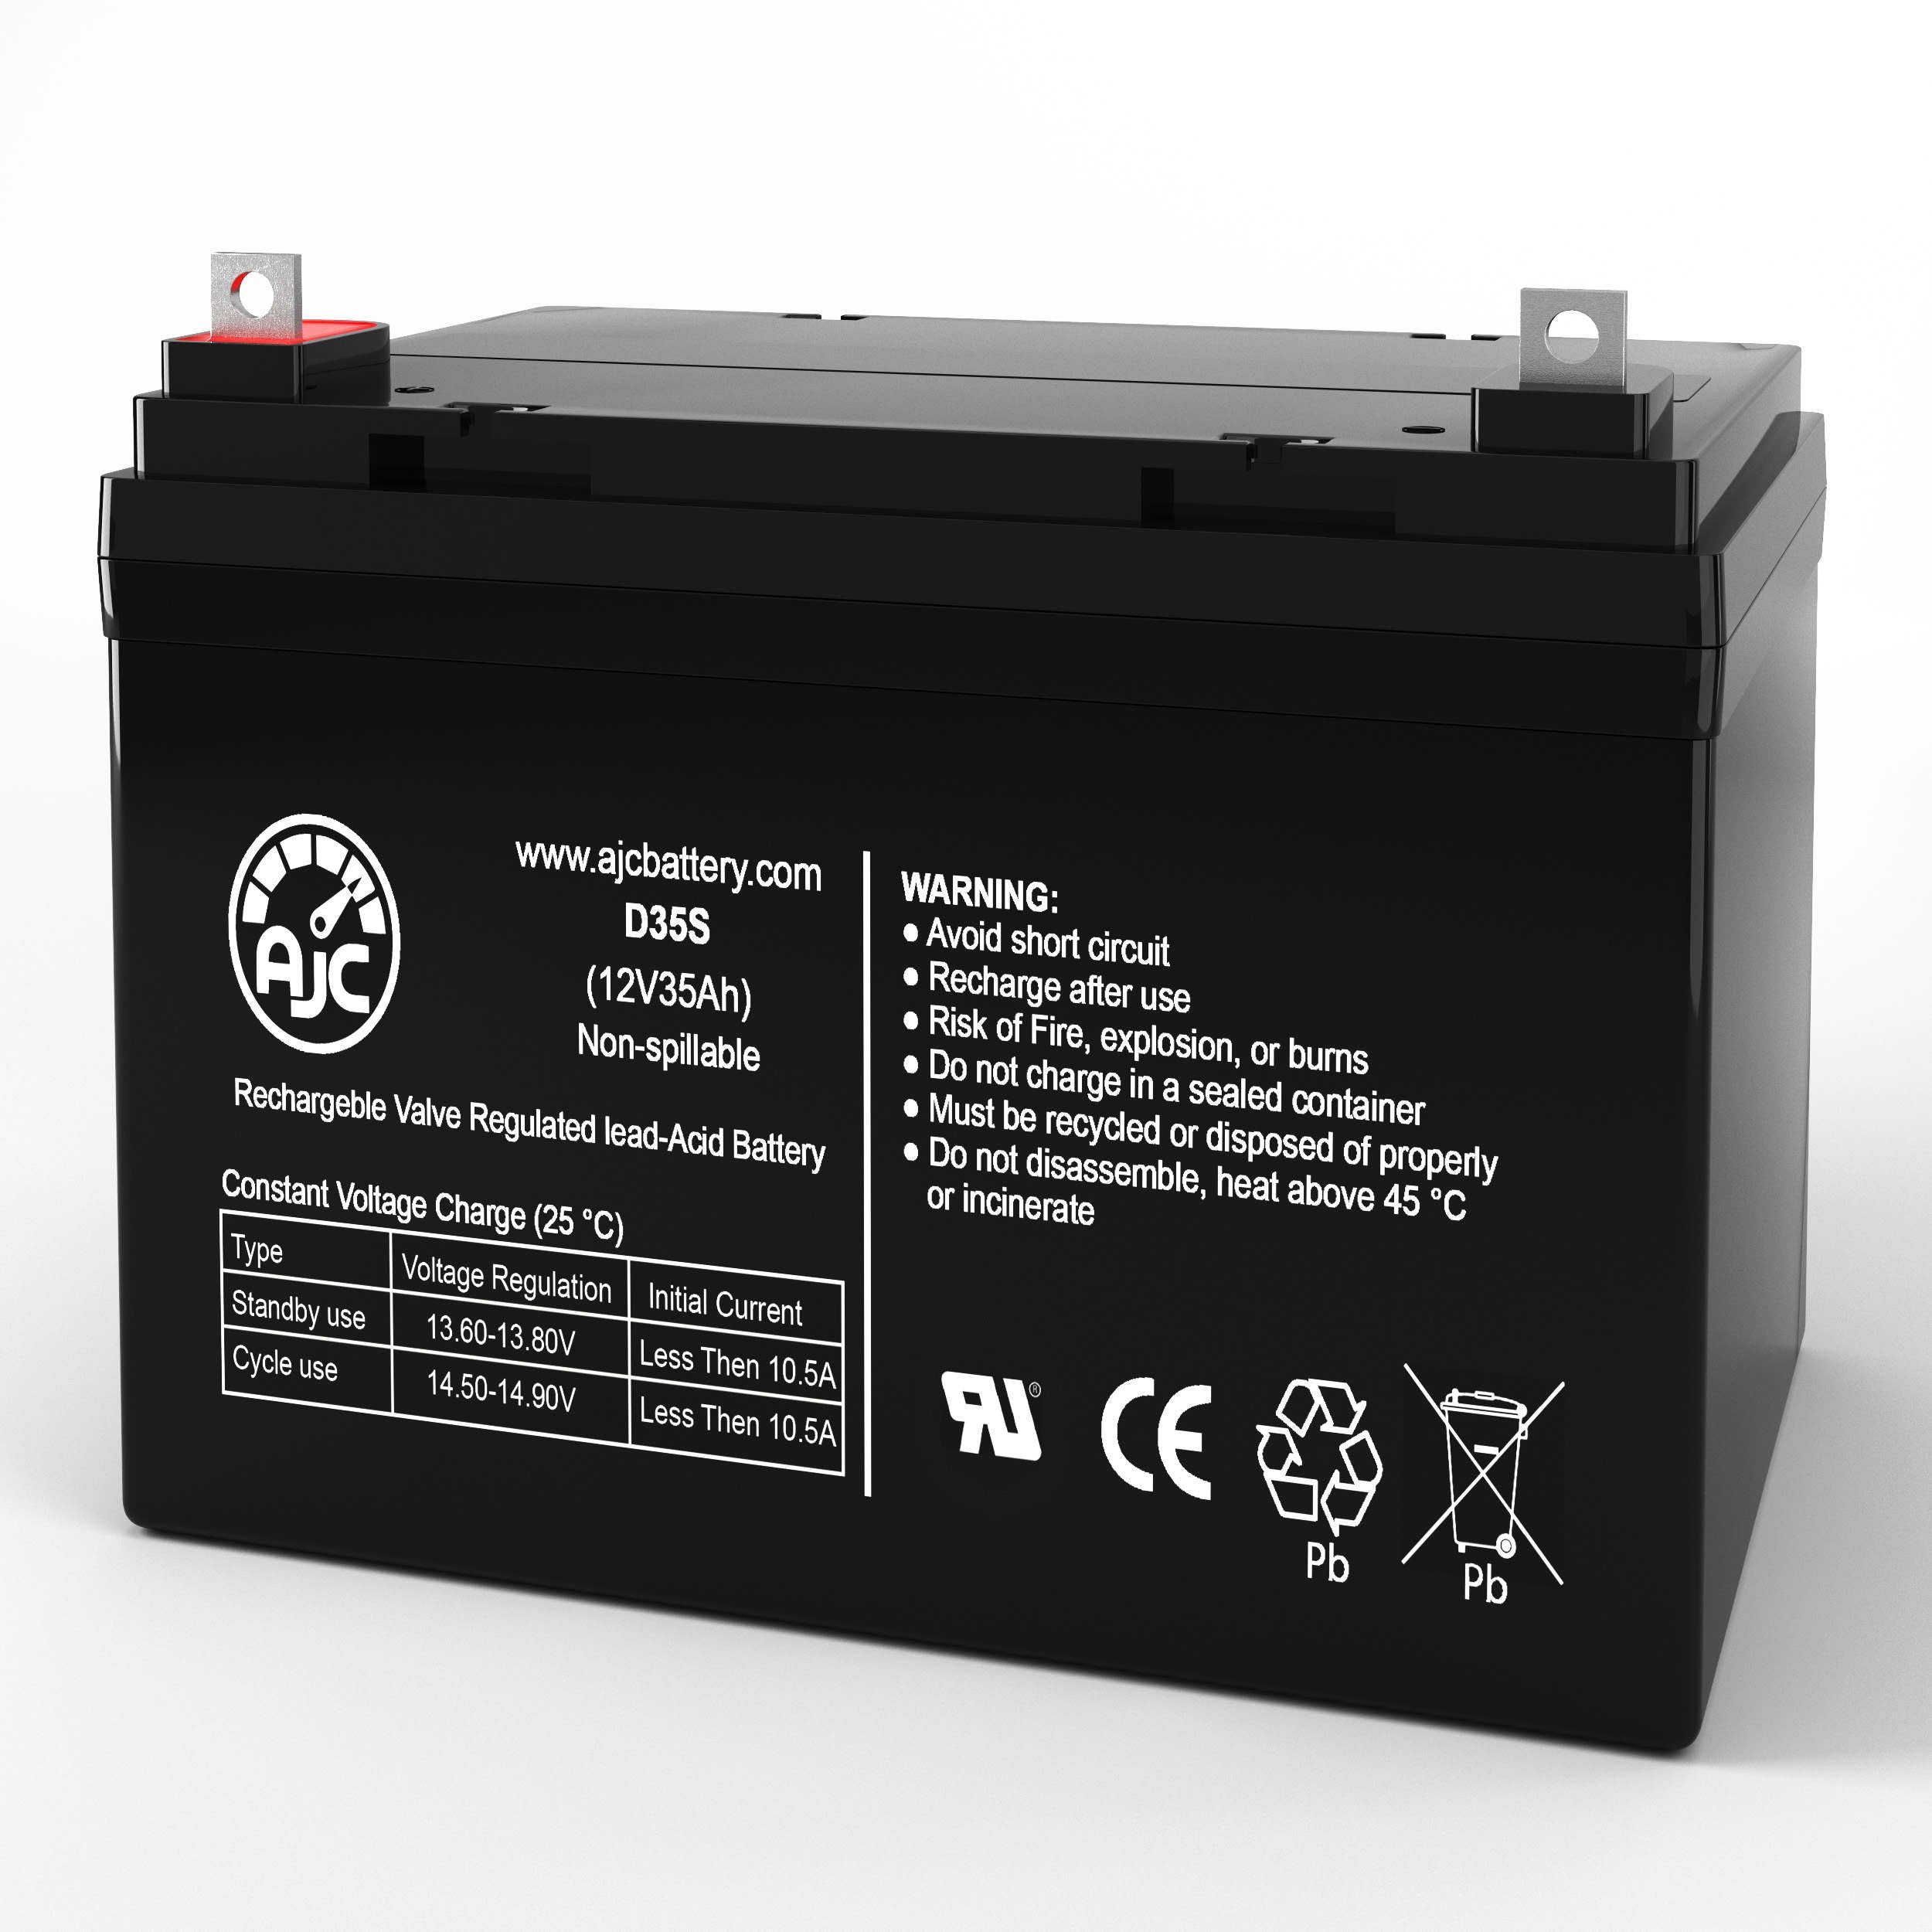 Jump N Carry JNC 660AIR 12V 35Ah Jump Starter Battery - This Is an AJC Brand Replacement - image 1 of 6